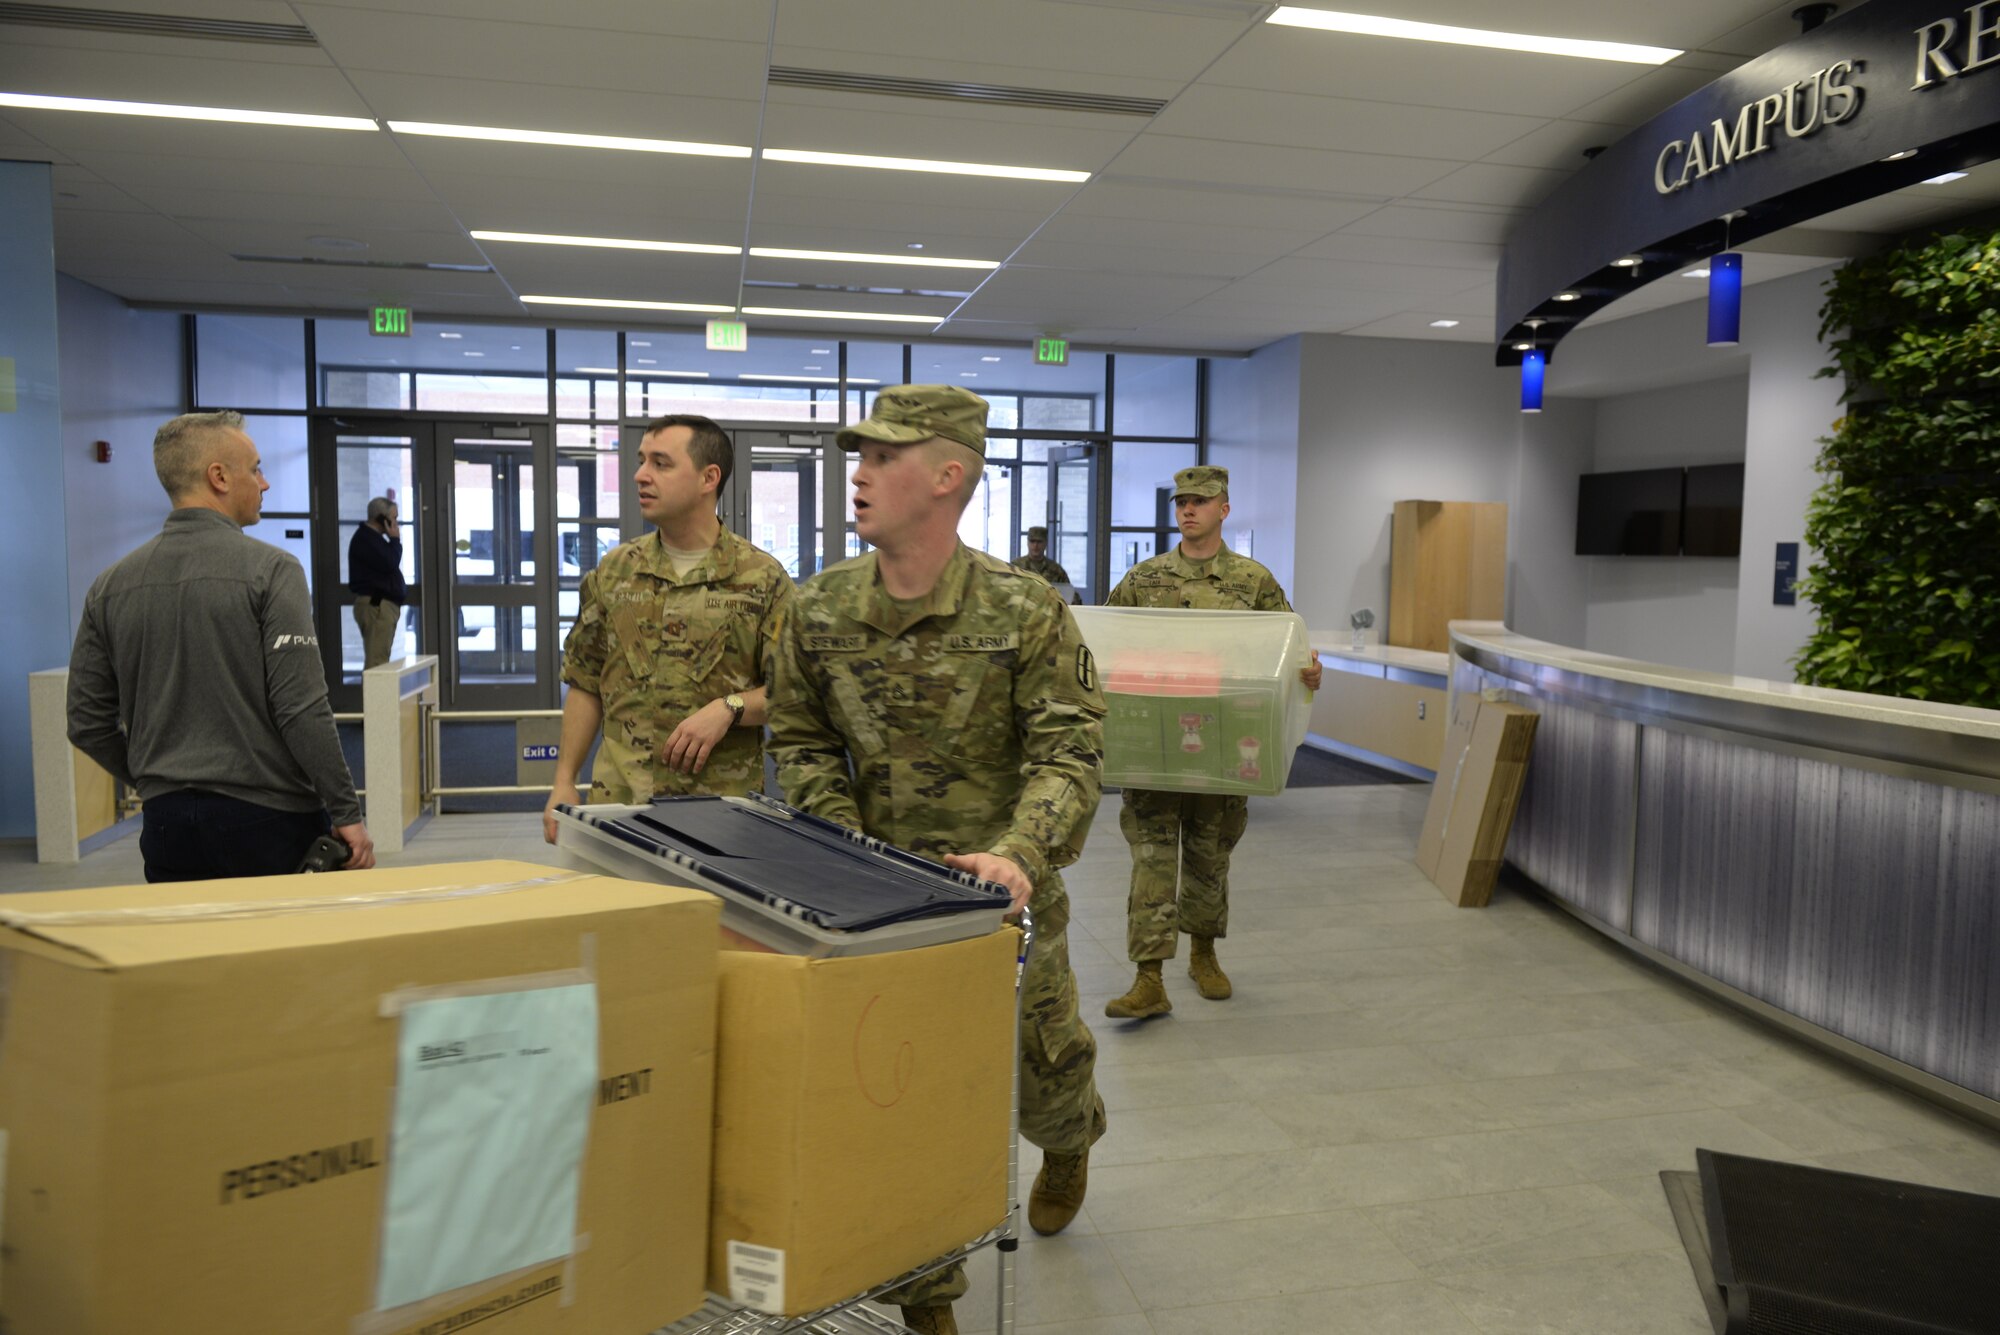 New Hampshire National Guardsmen bring medical supplies into the Hamel Recreation Center at the University of New Hampshire, March 25, 2020. The facility will augment area hospitals treating COVID-19 cases, if necessary. It is one of nine the NHNG plans to set up and manage across the state. (U.S. Air National Guard photo by Tech. Sgt. Aaron Vezeau)